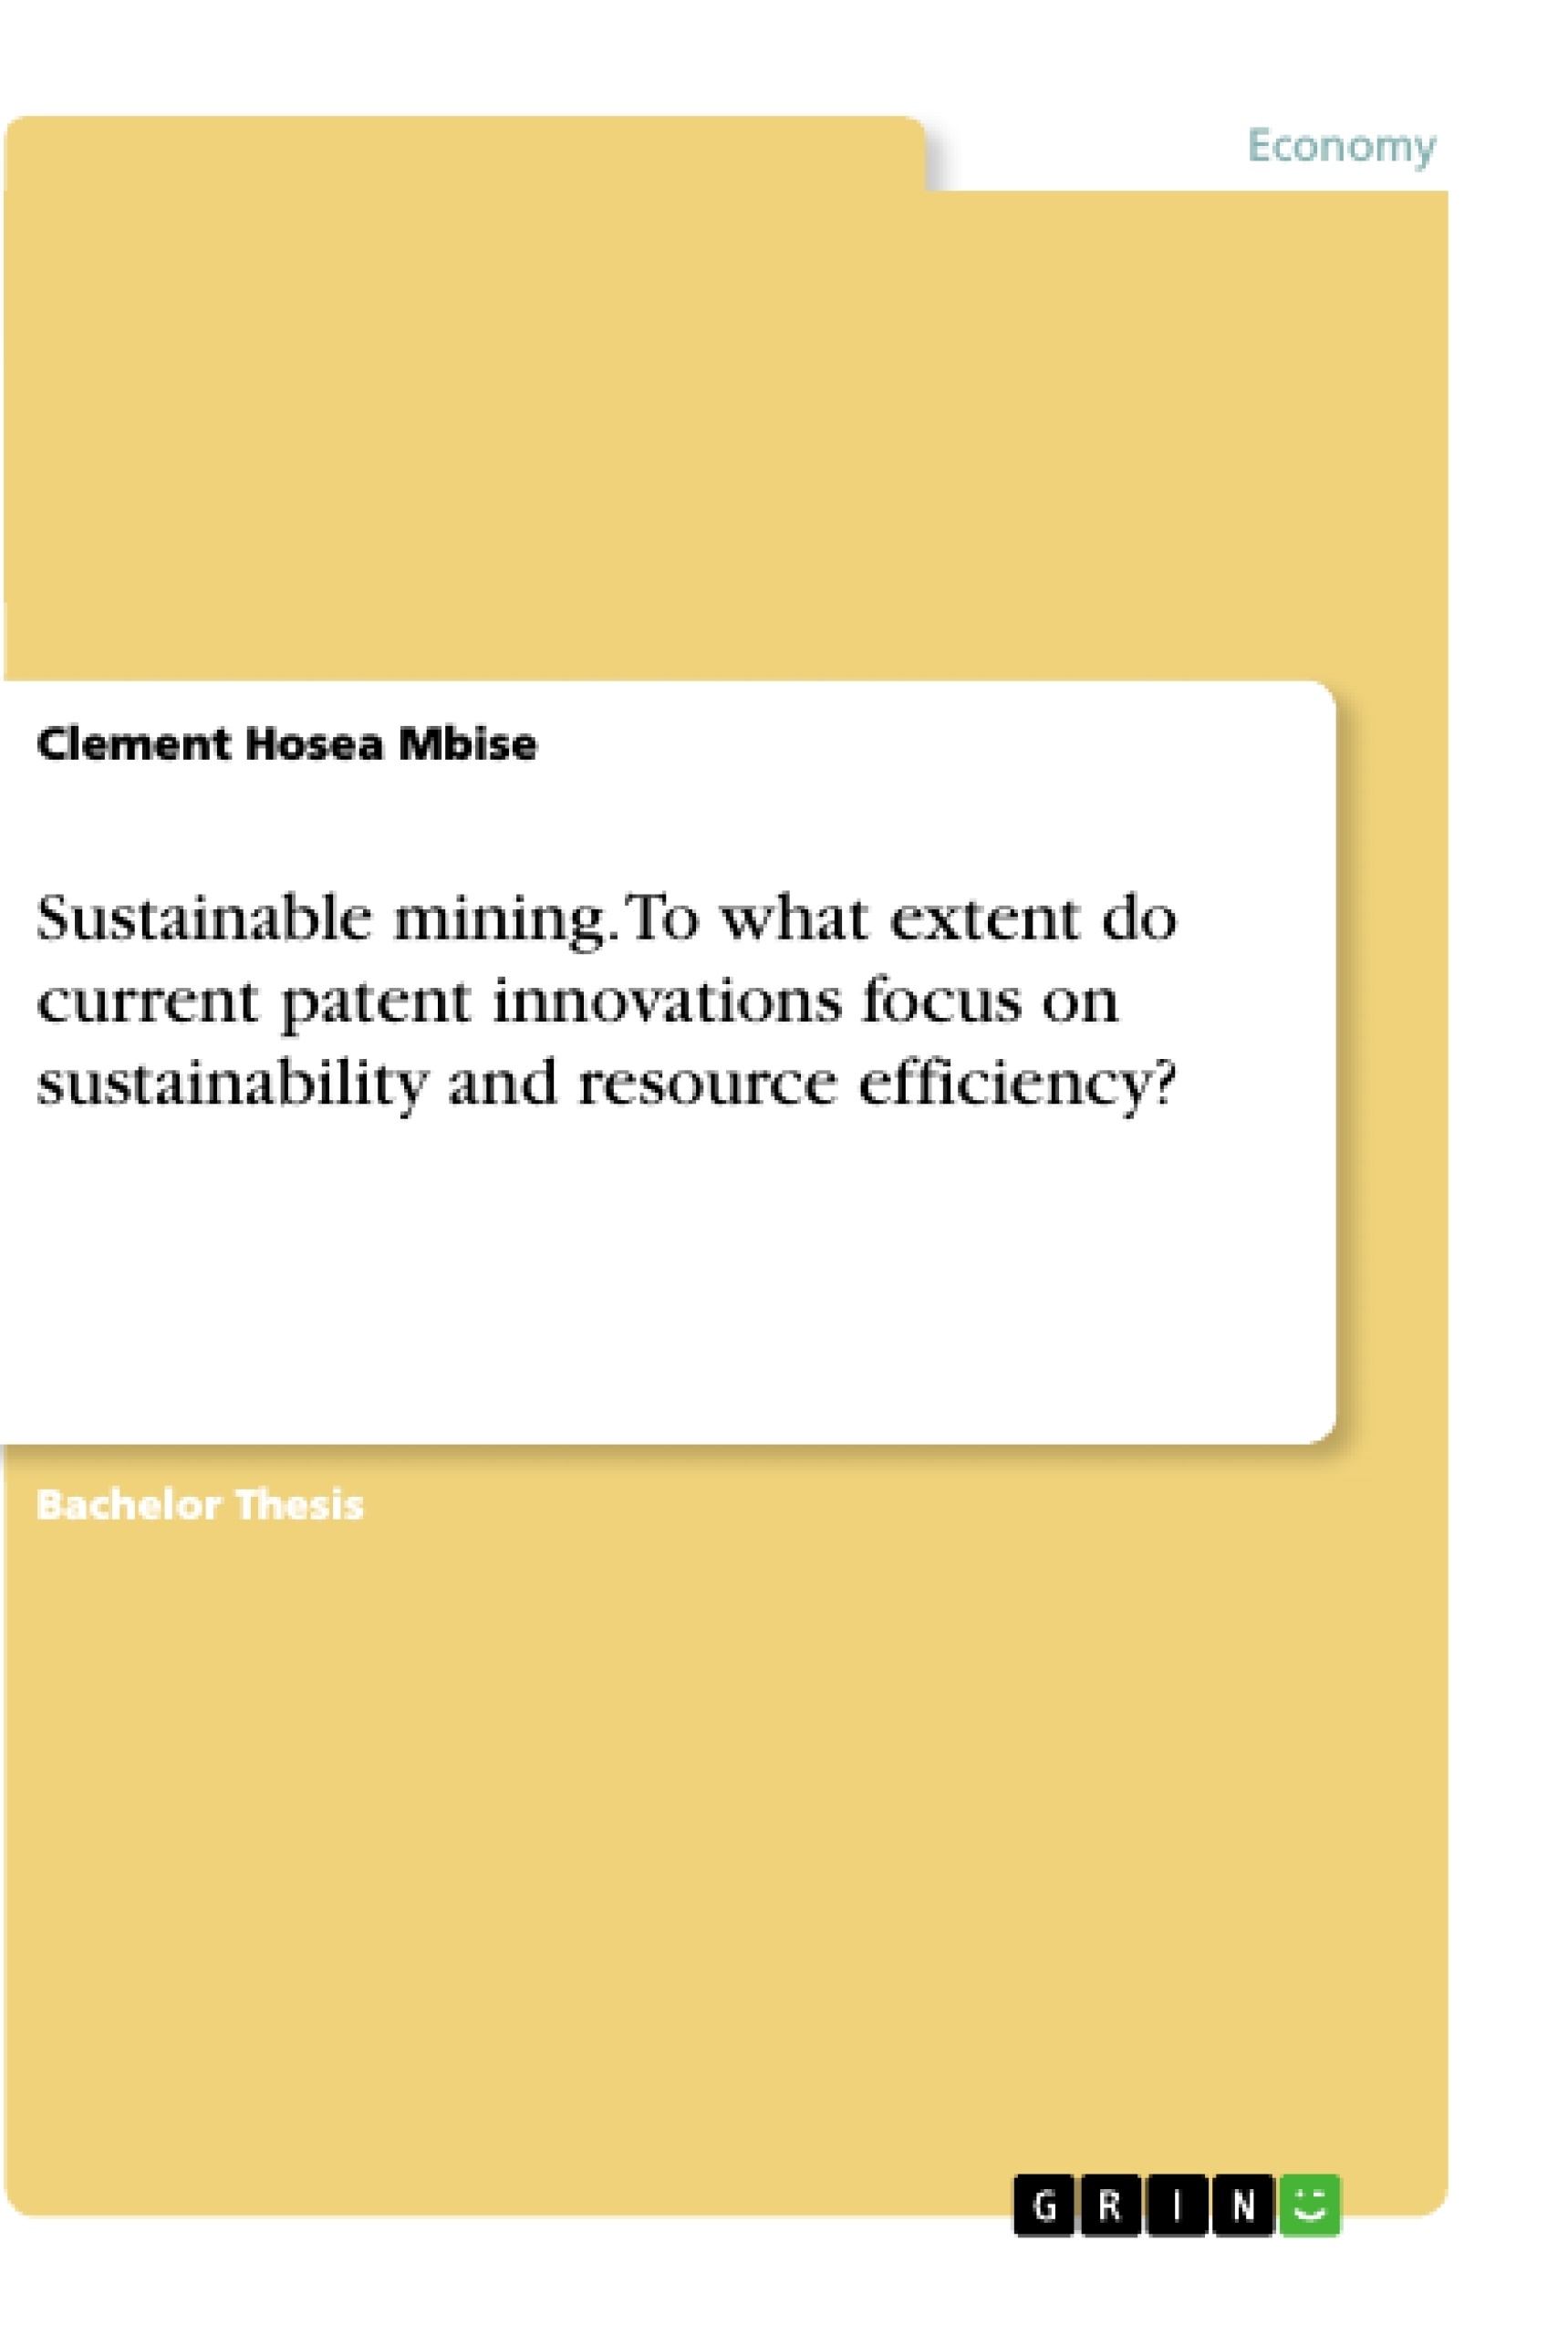 Title: Sustainable mining. To what extent do current patent innovations focus on sustainability and resource efficiency?